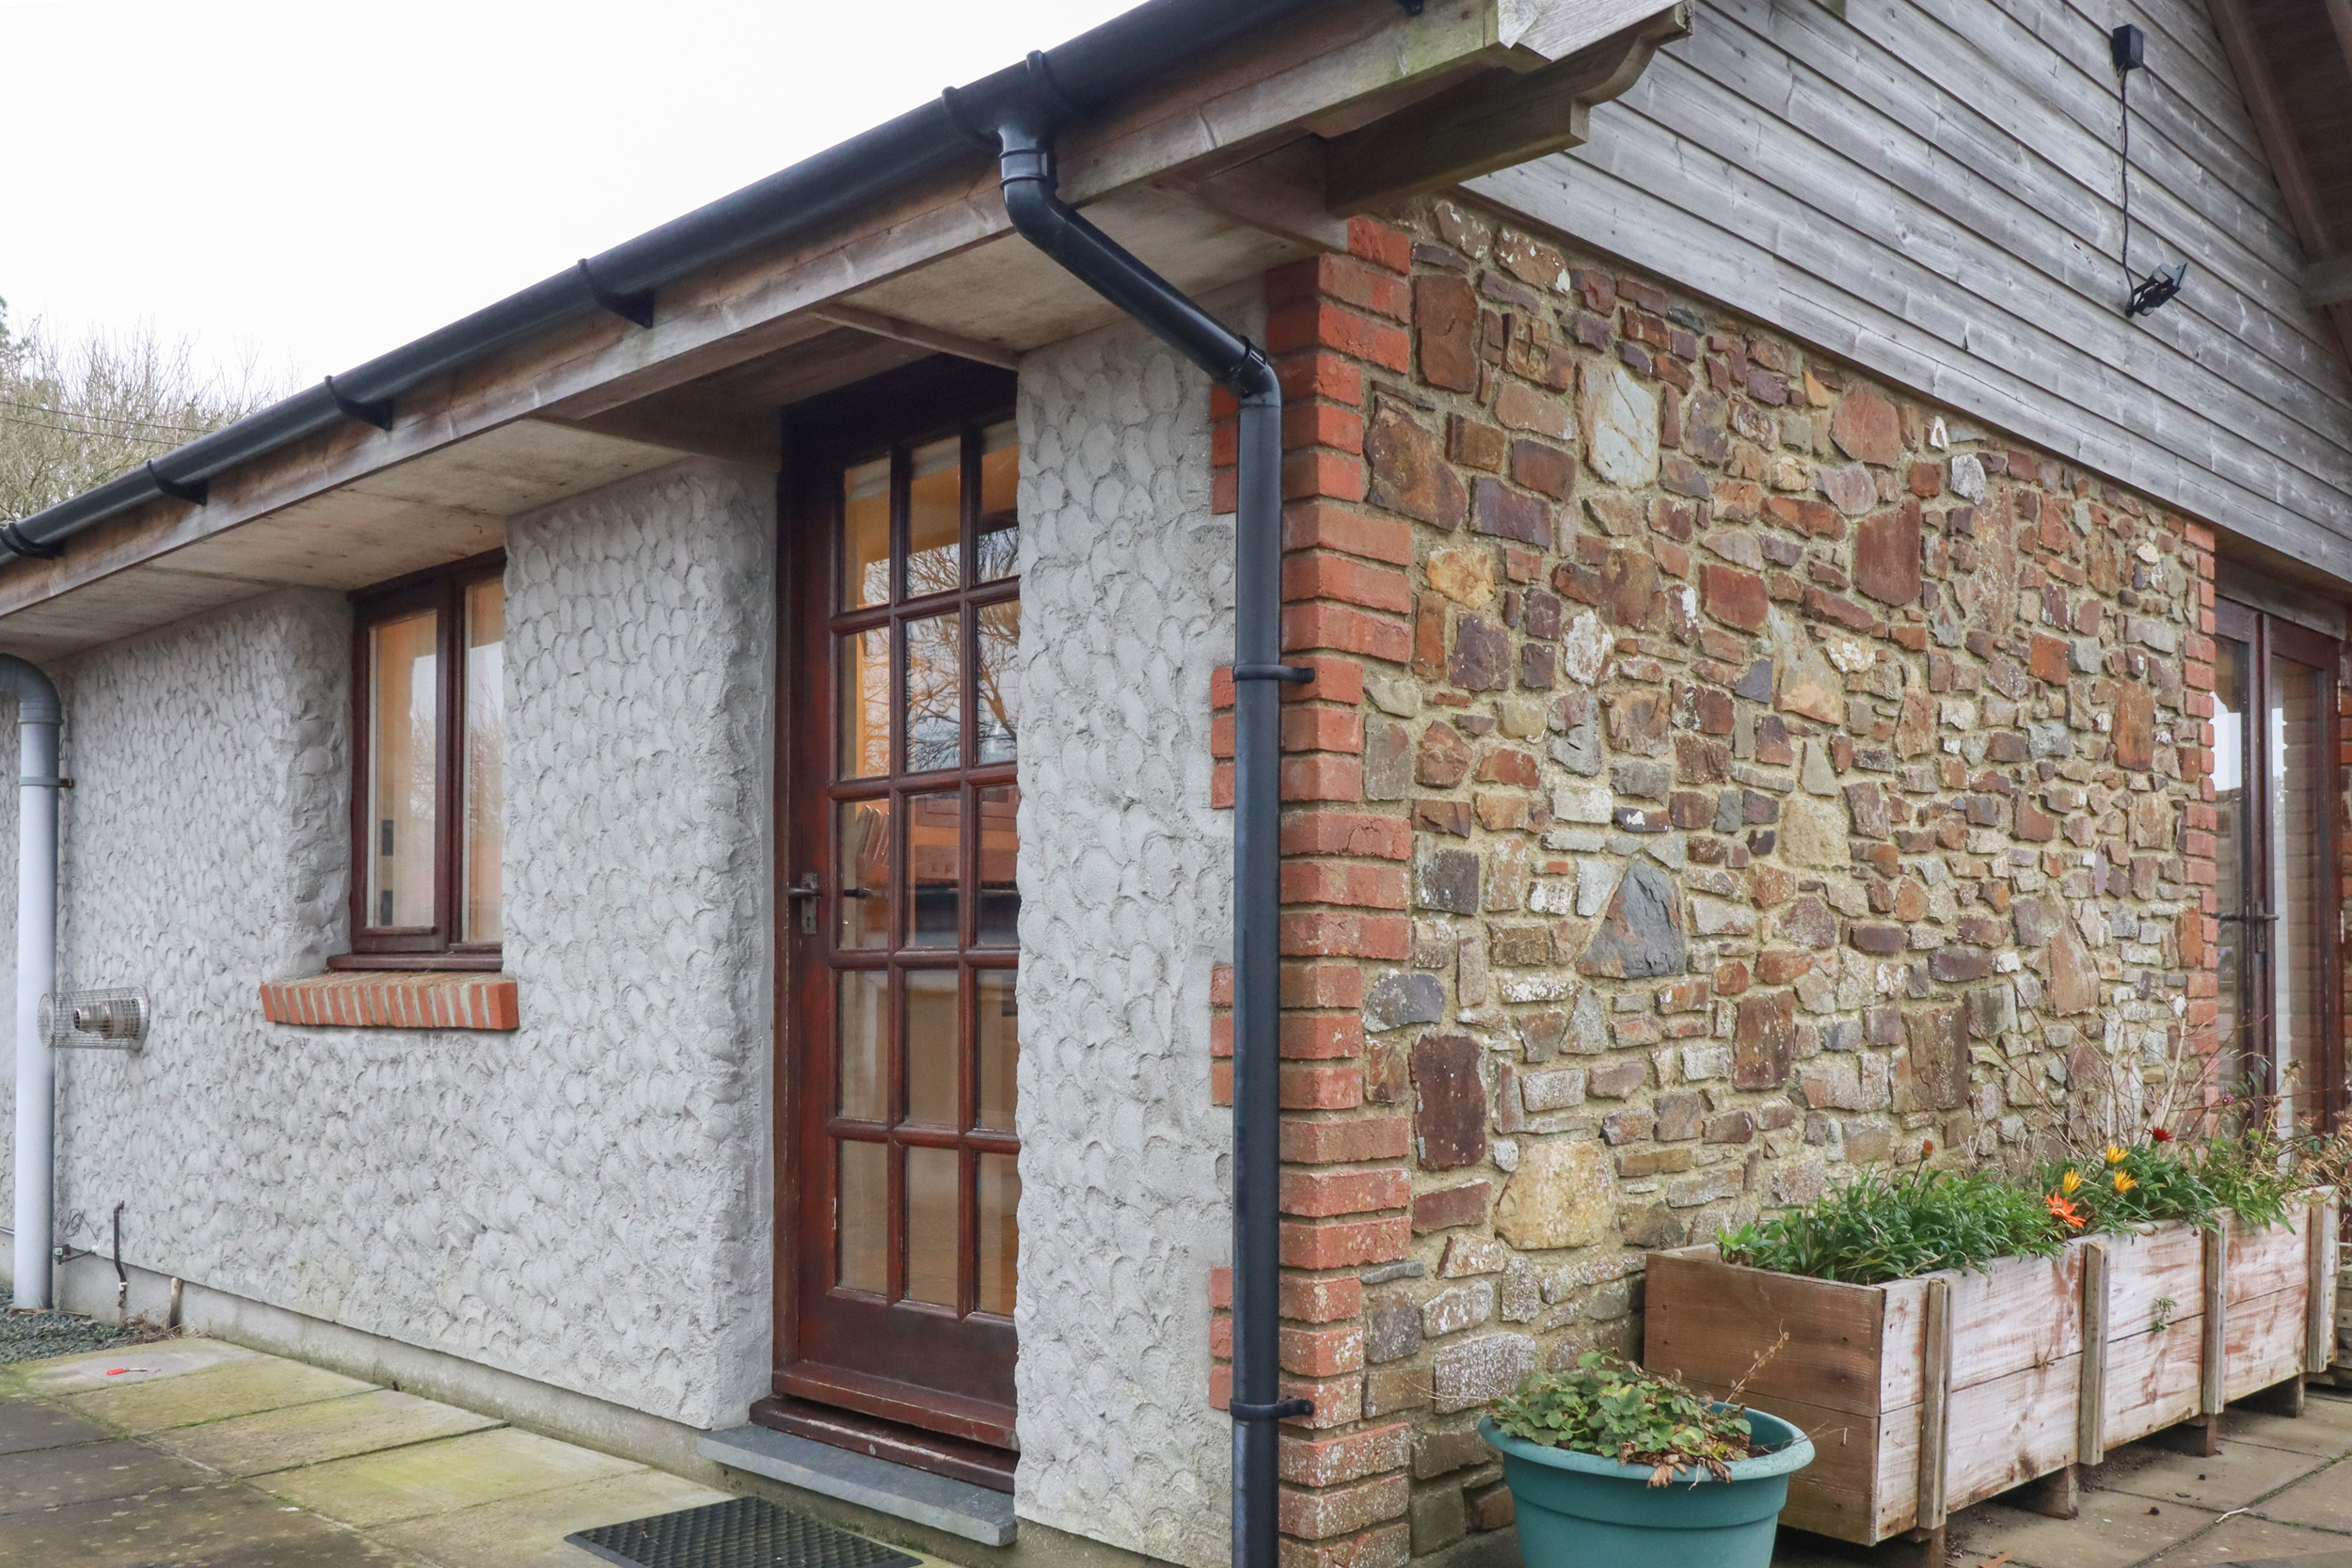 1 bedroom Cottage for rent in Stratton